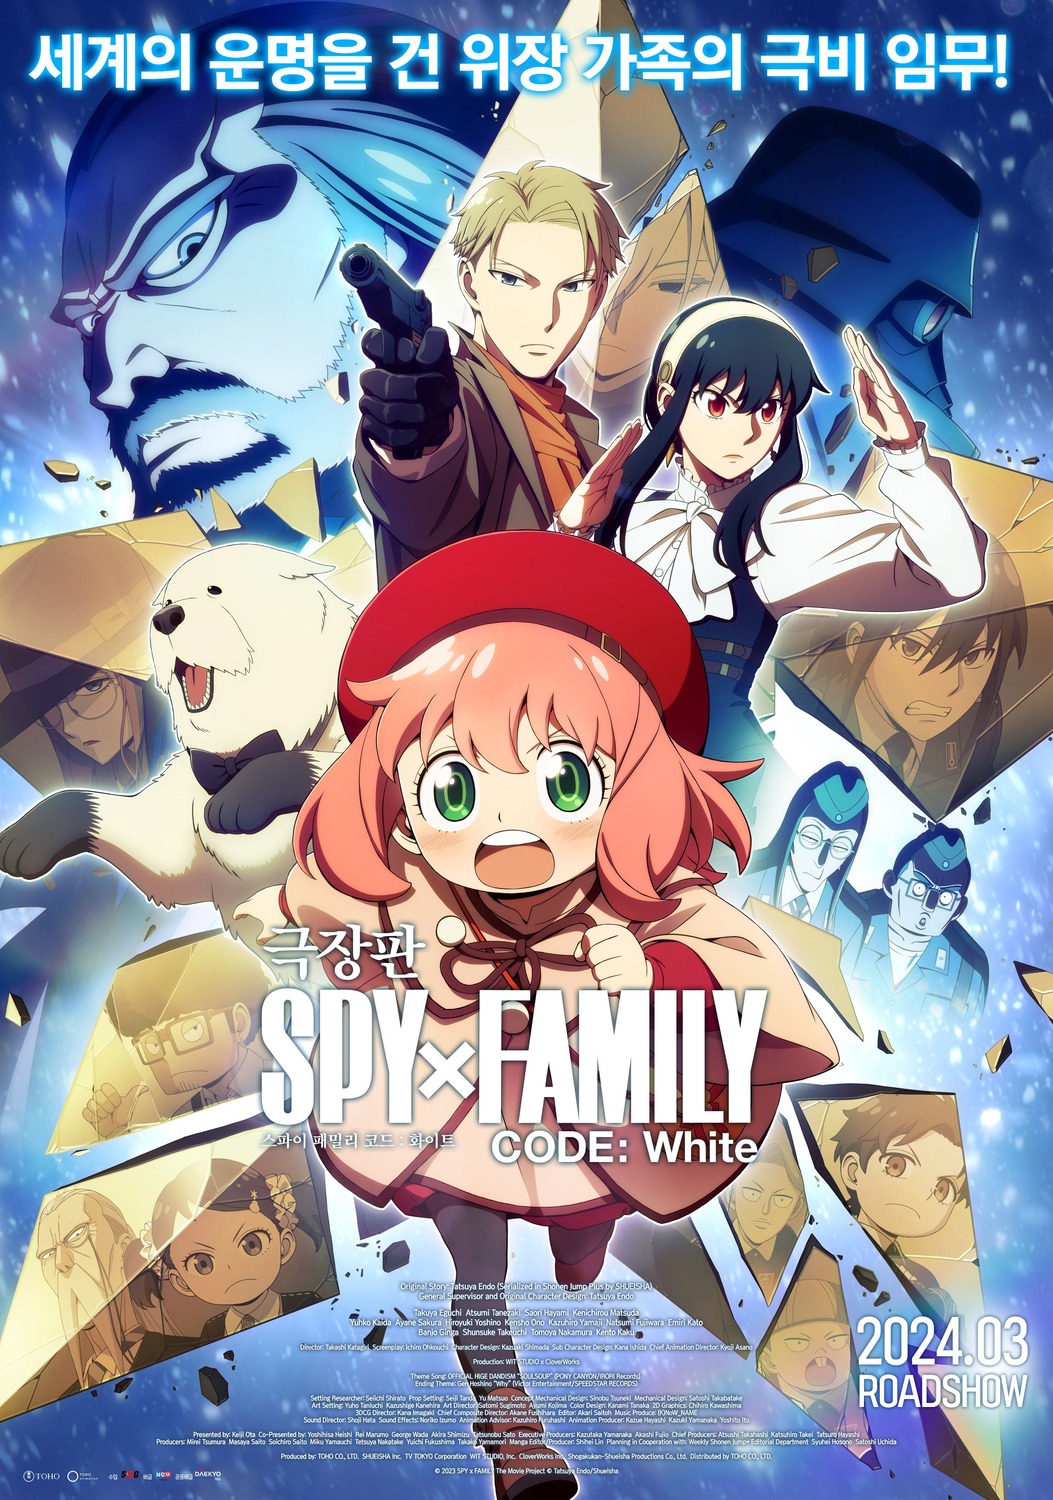 Extra Large Movie Poster Image for Gekijoban Spy x Family Code: White (#3 of 4)